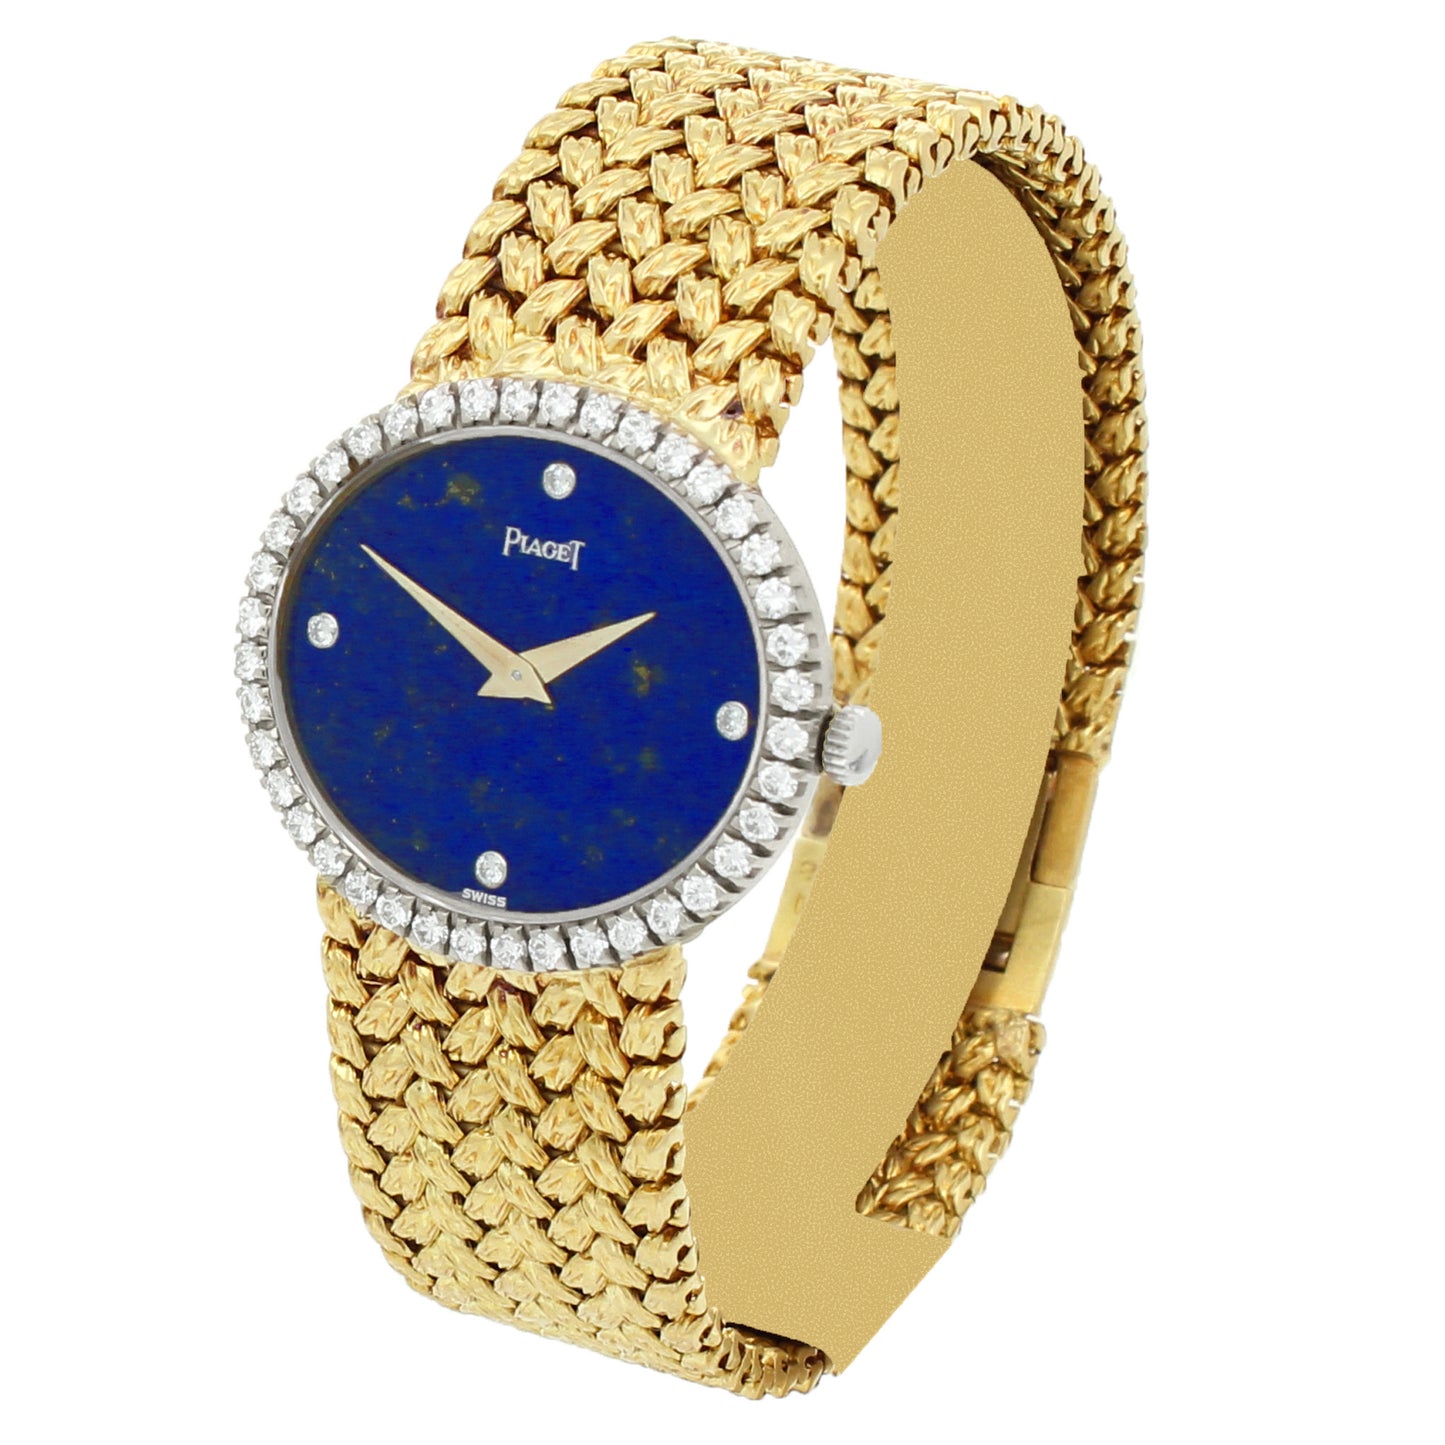 18ct yellow gold 'oval cased' bracelet watch with lapis lazuli dial and diamond set bezel. Made 1970s